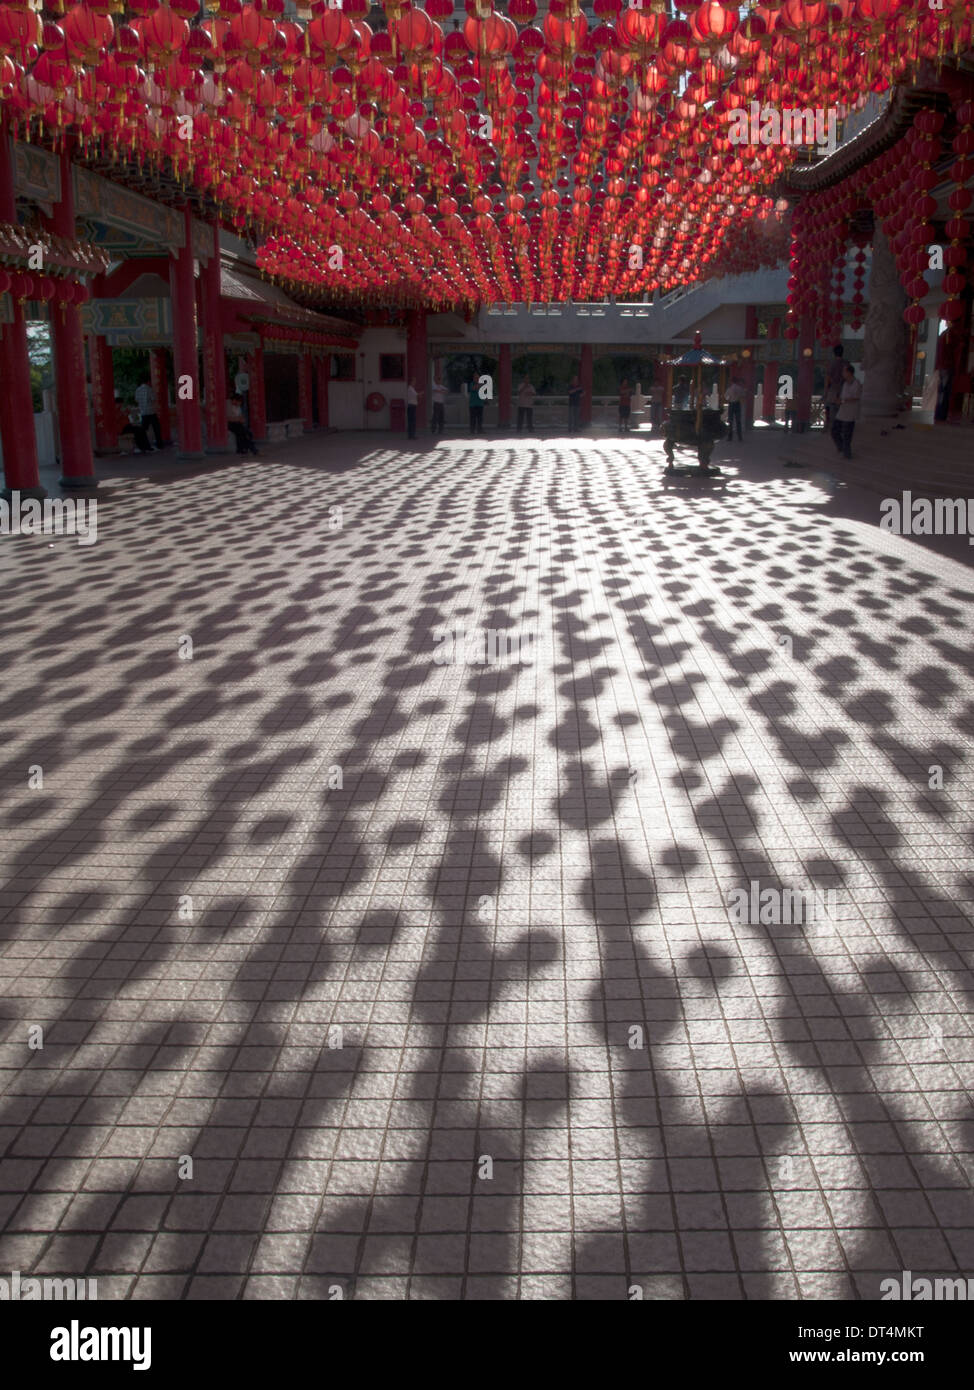 multitudes of auspicious red lanterns form a canopy, casting its patterned shadow over a Malay Chinese temple courtyard. Stock Photo